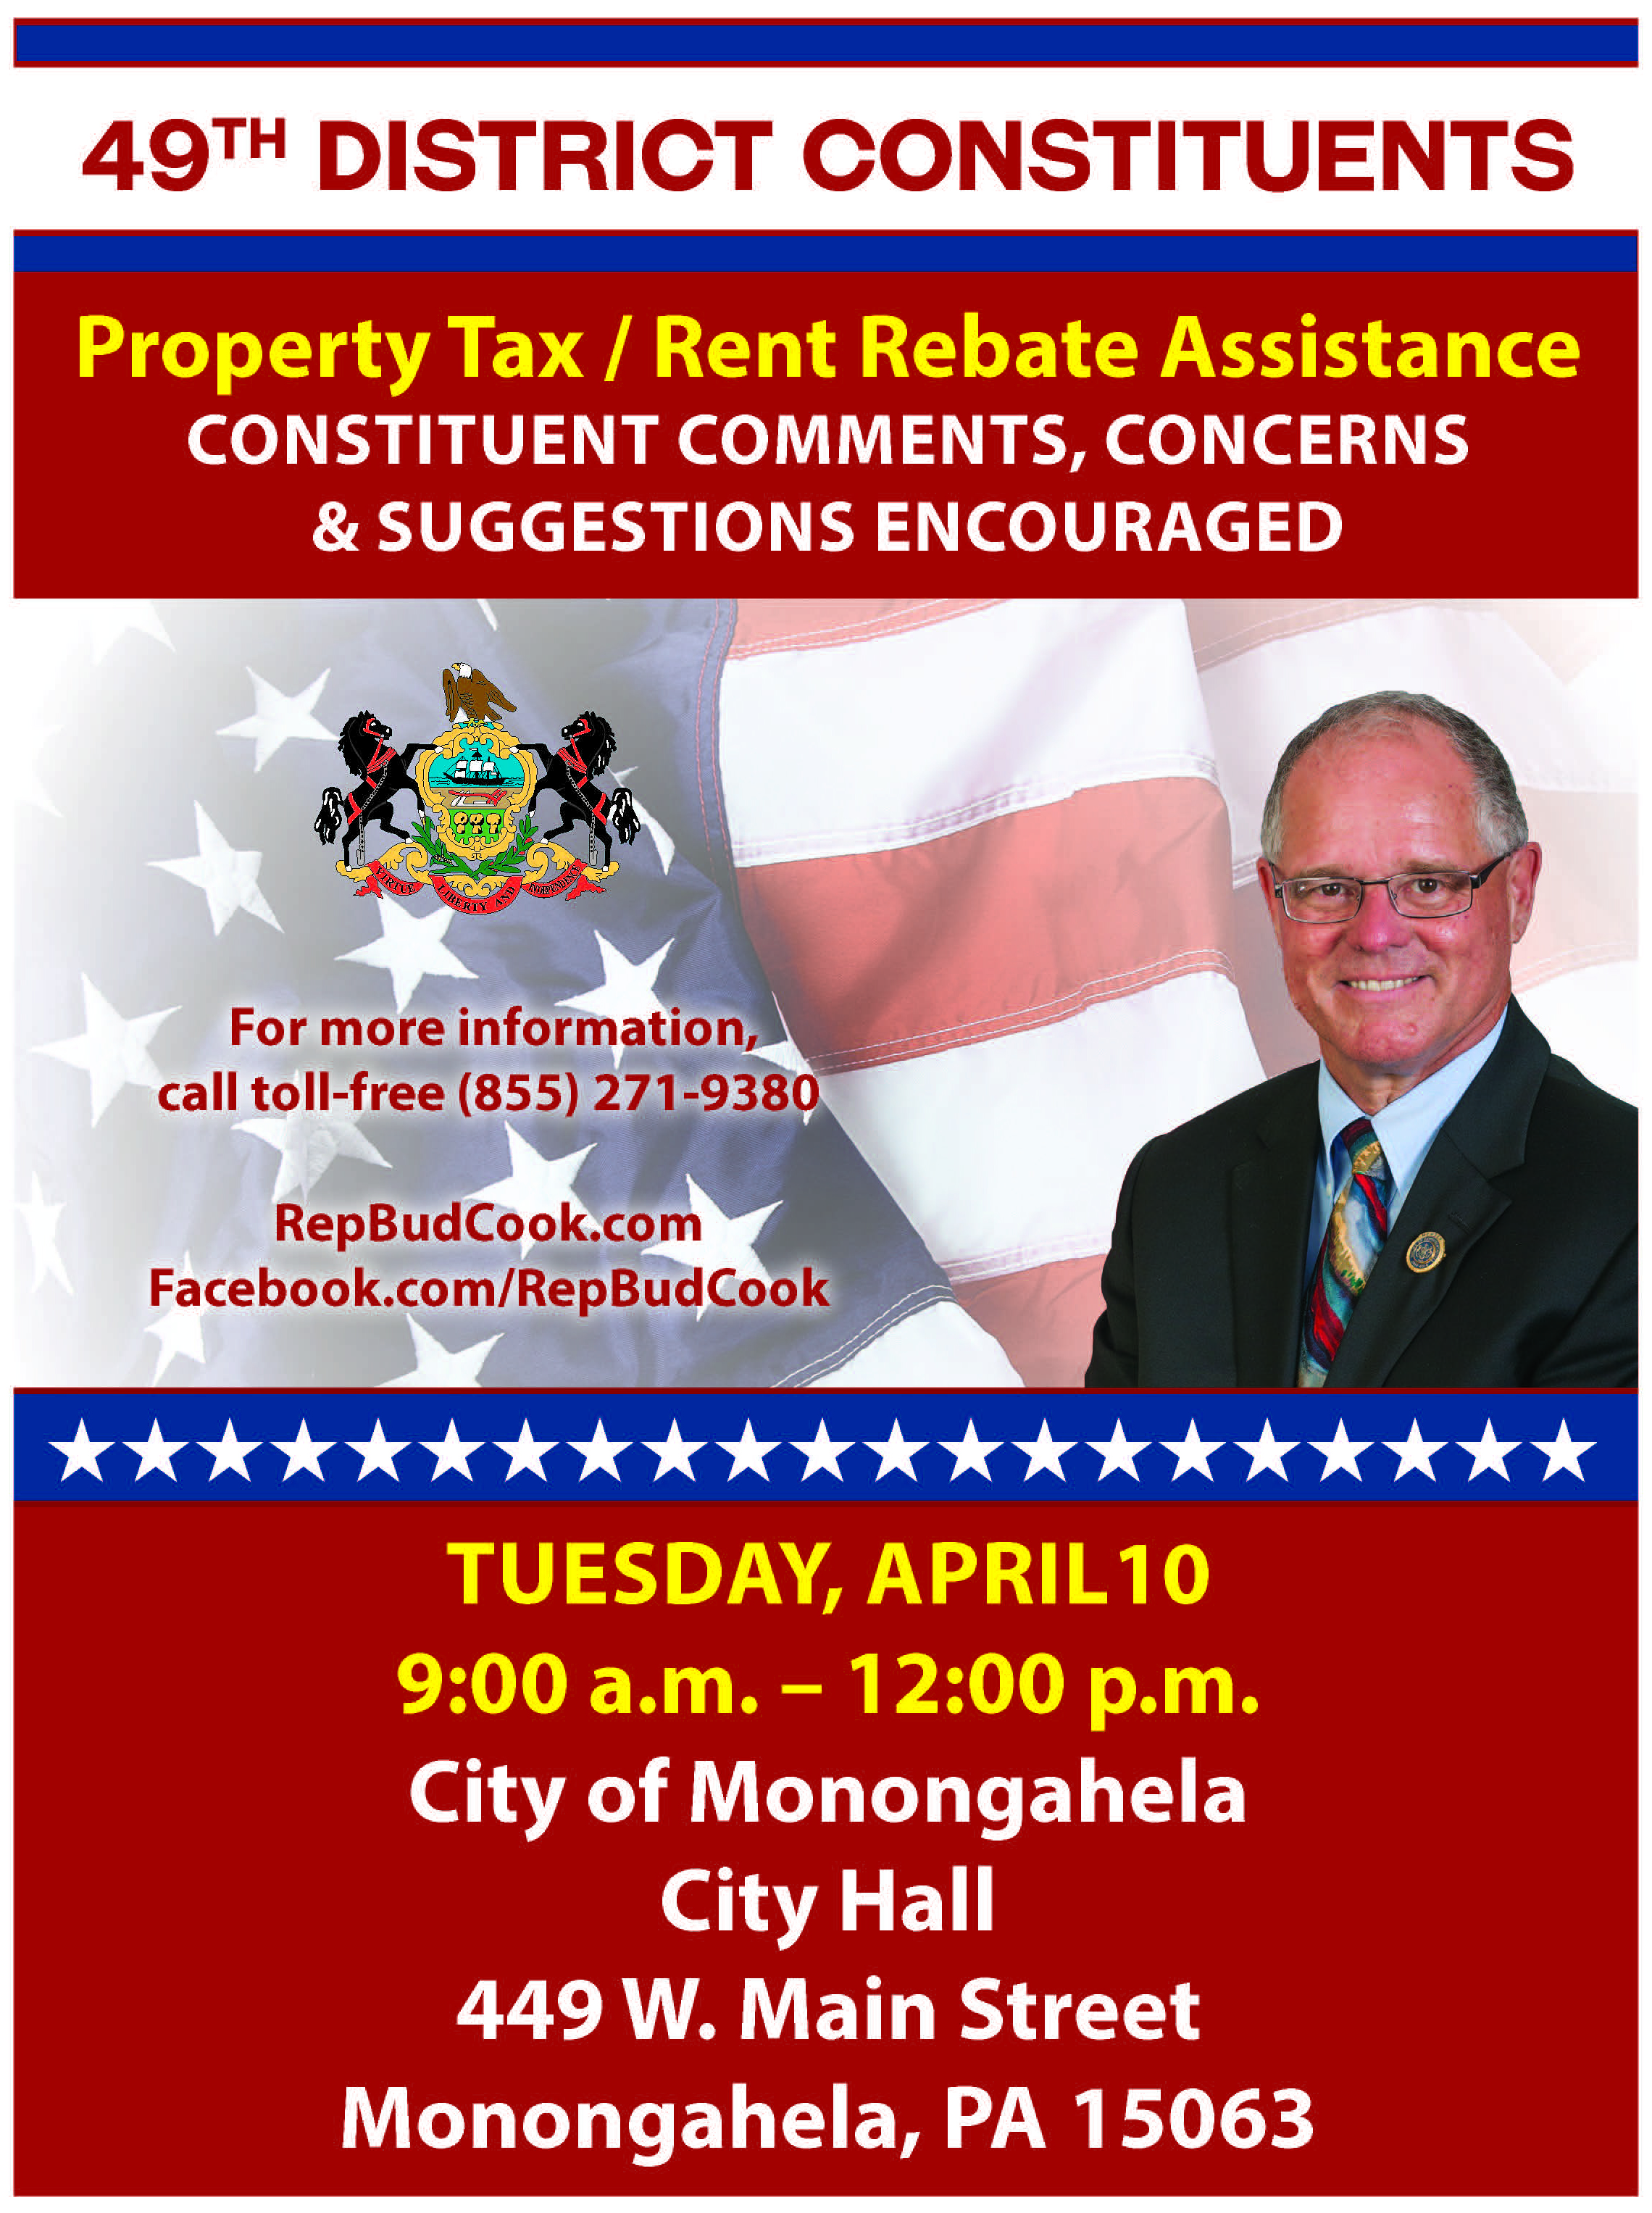 don-t-miss-out-on-free-property-tax-rent-rebate-assistance-in